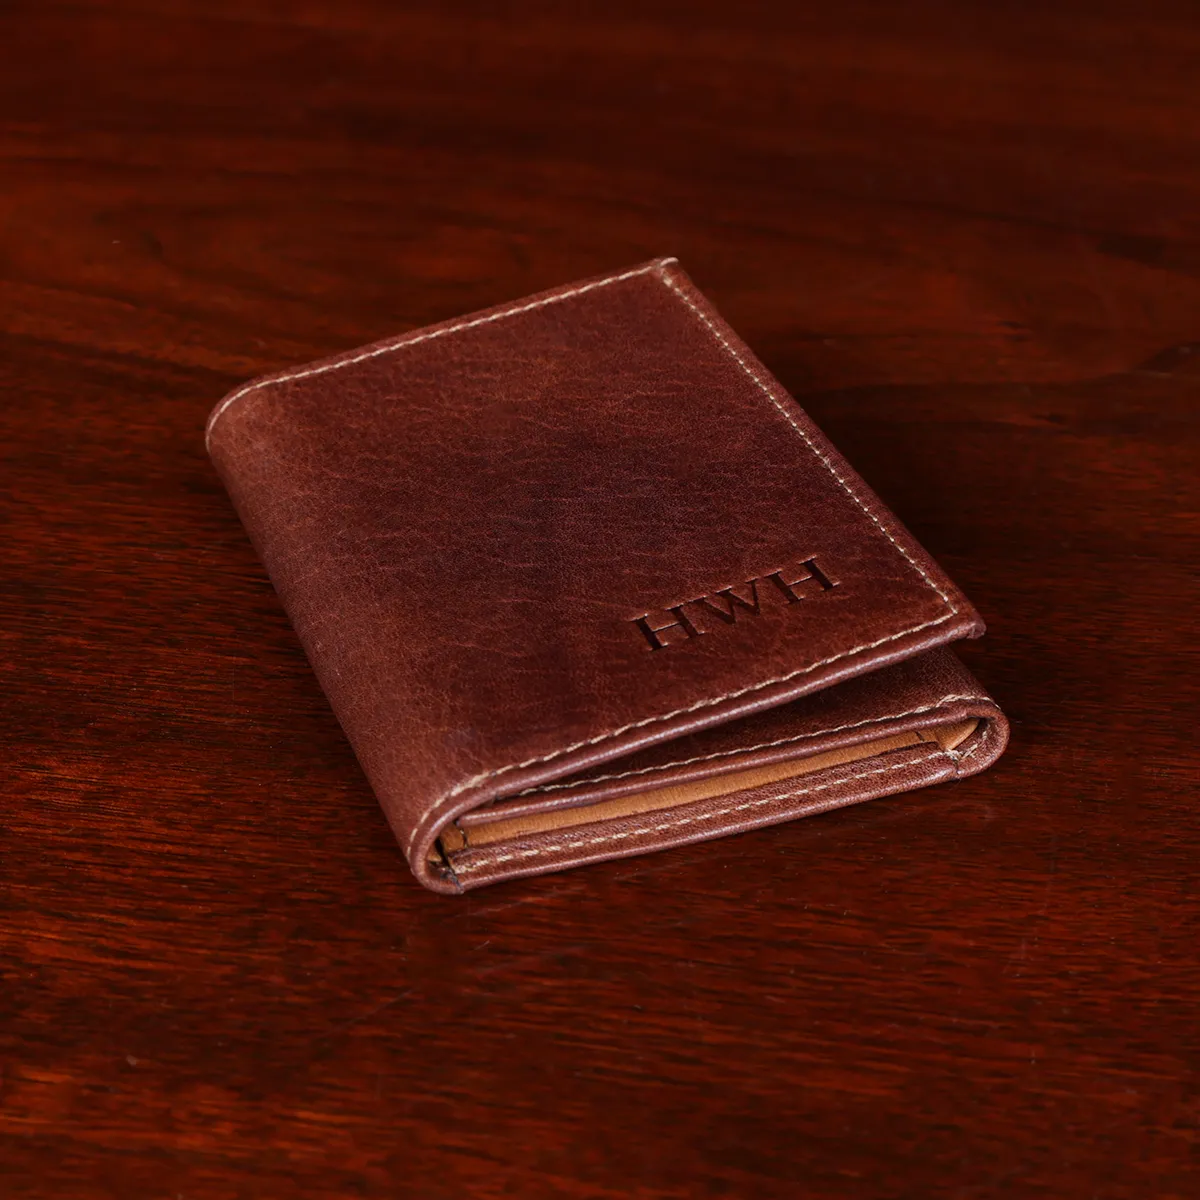 Louisiana Lafayette Leather Trifold Wallet (Manmade Interior)